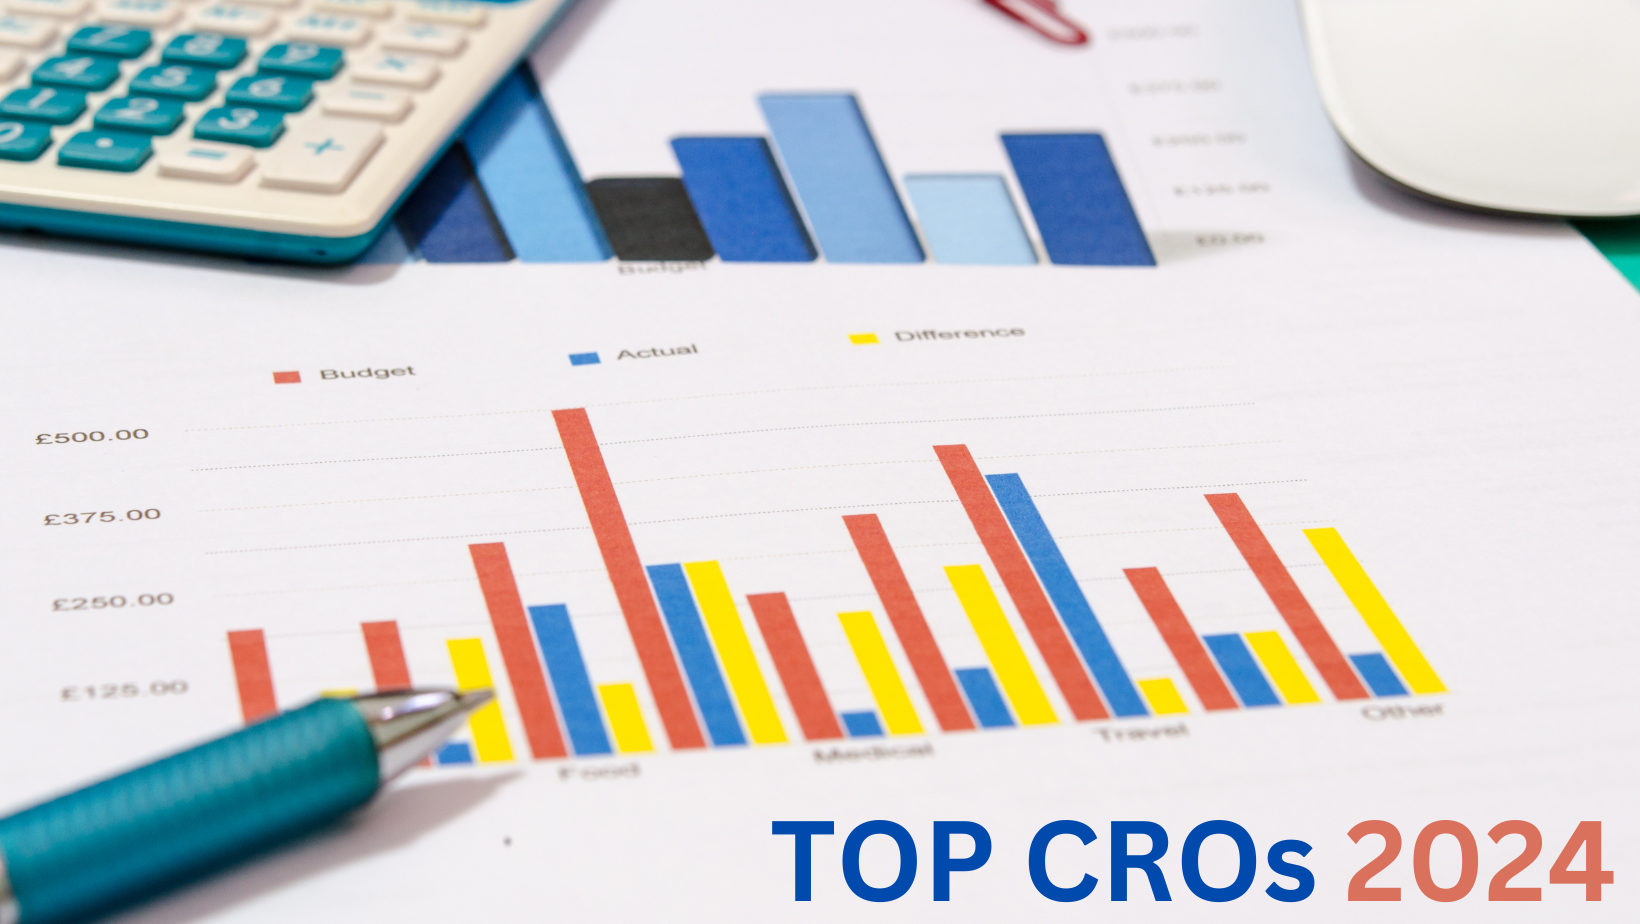 Top 15 Contract Research Organizations (CROs) in 2024